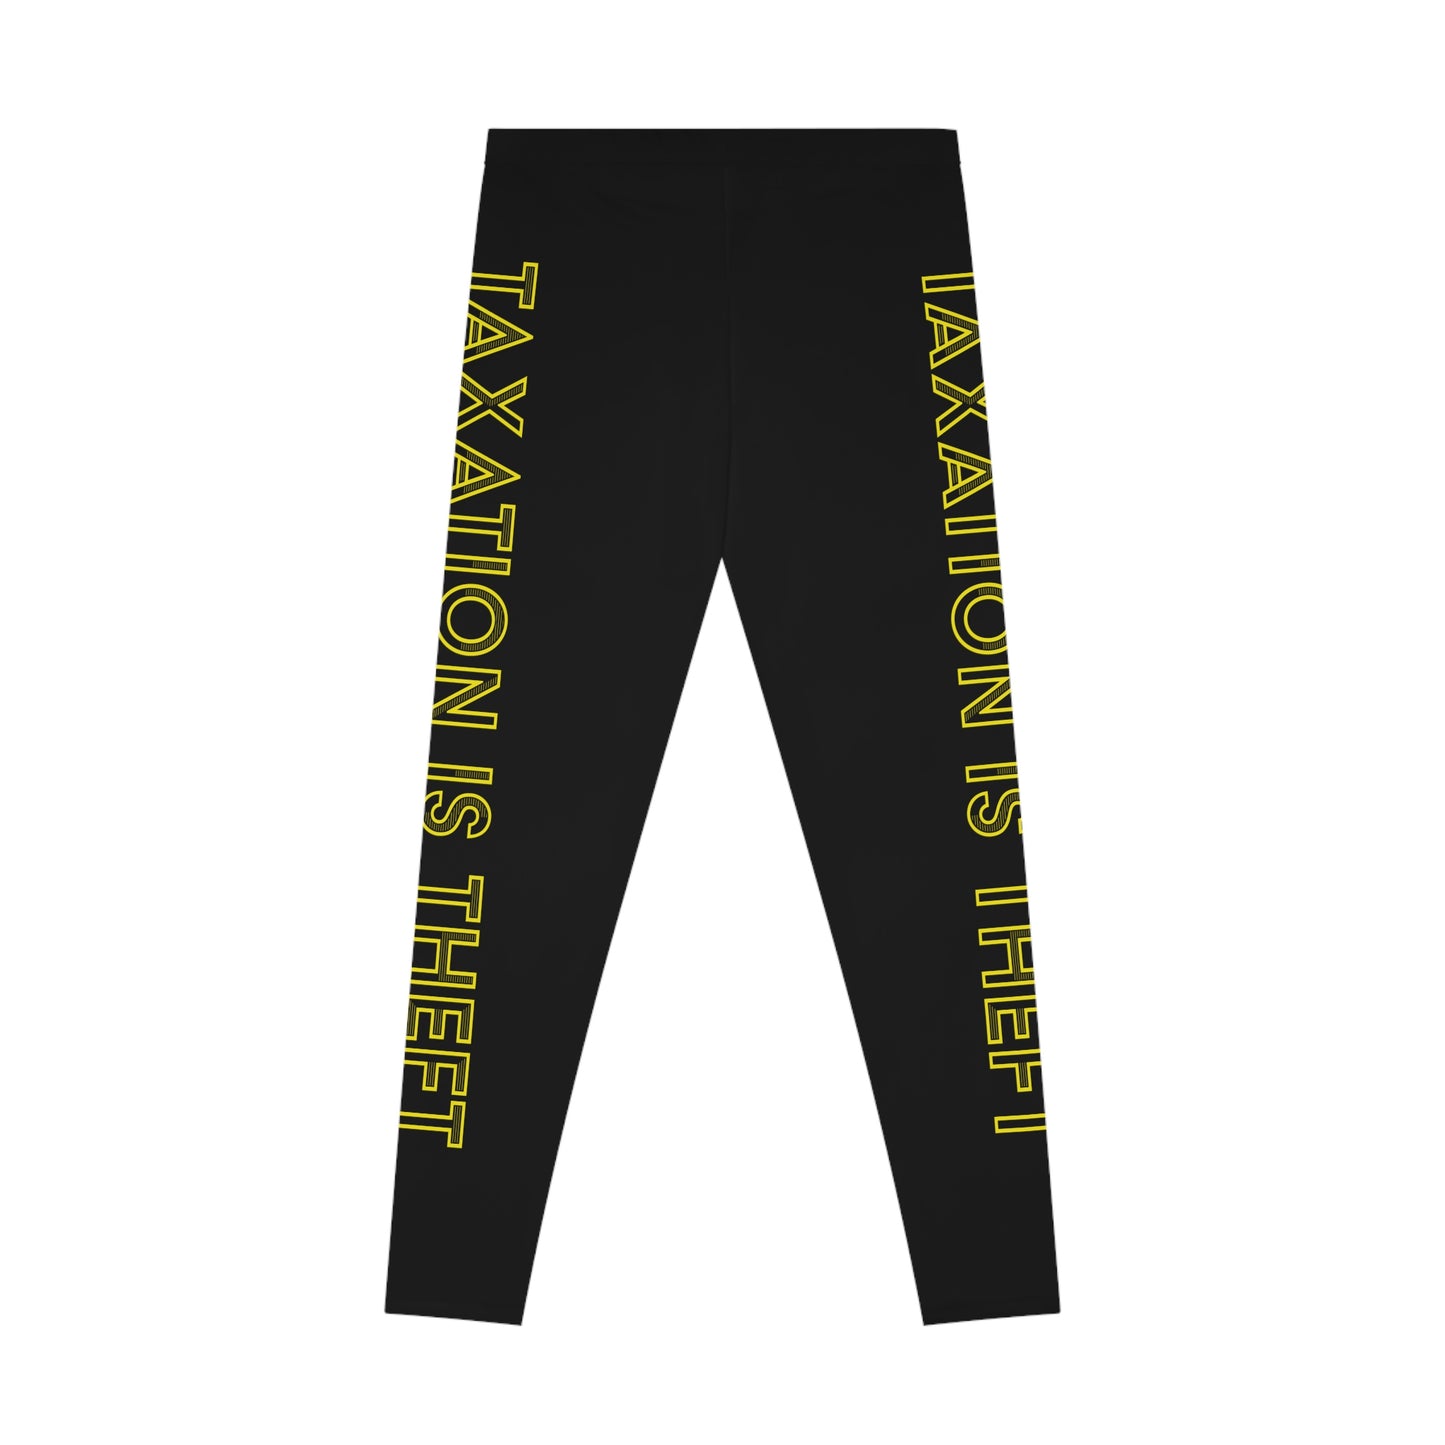 Taxation is Theft Stretchy Leggings